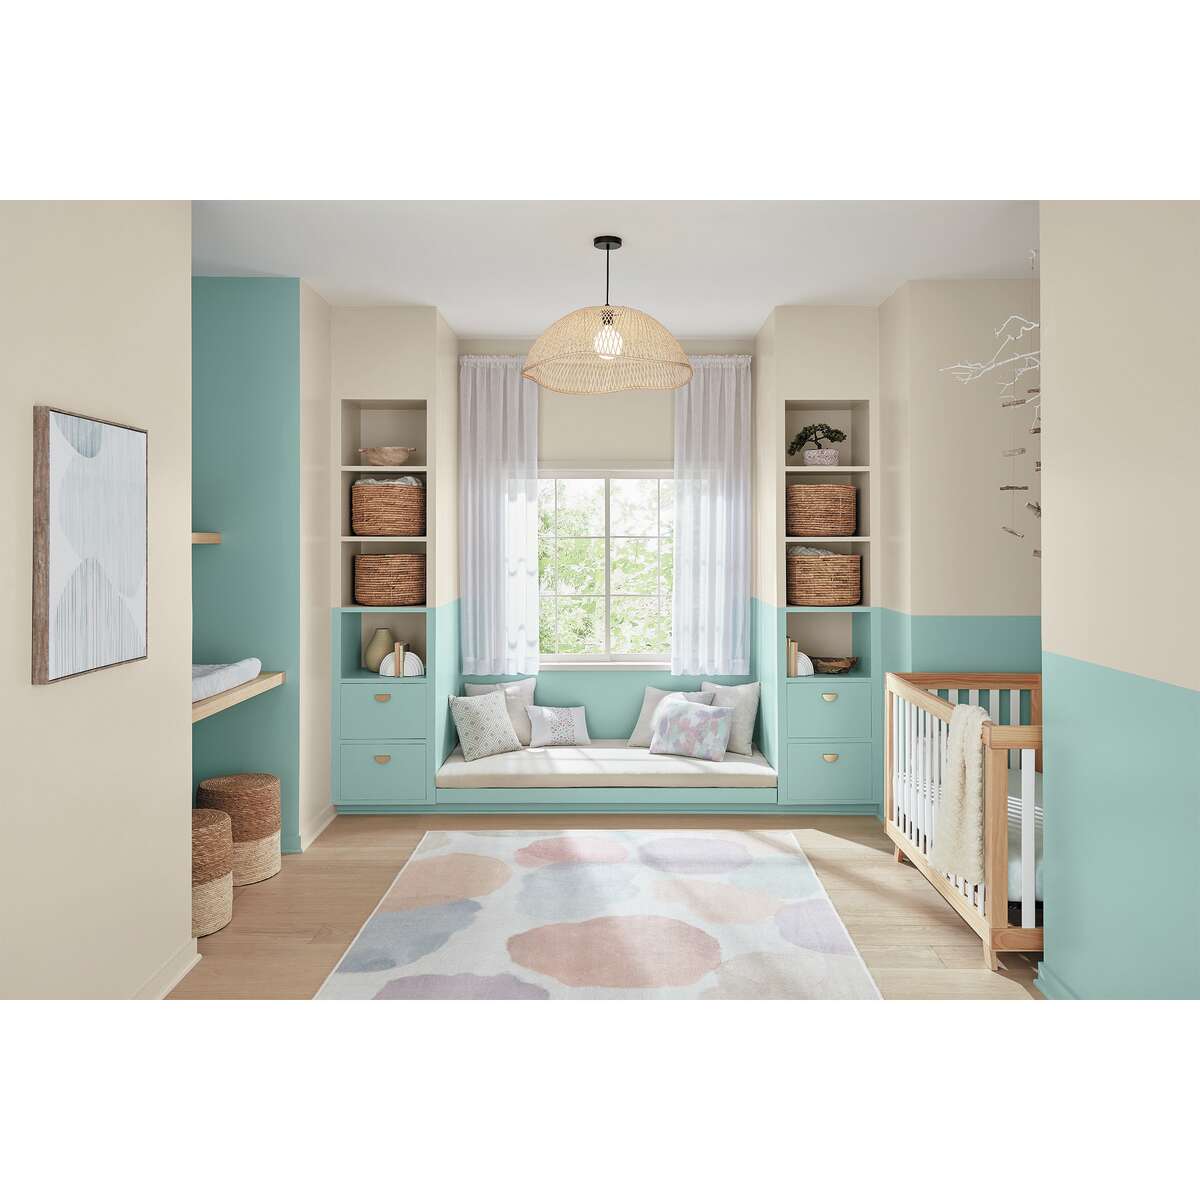 Valspar names a soft turquoise, Renew Blue, as its top color for 2024